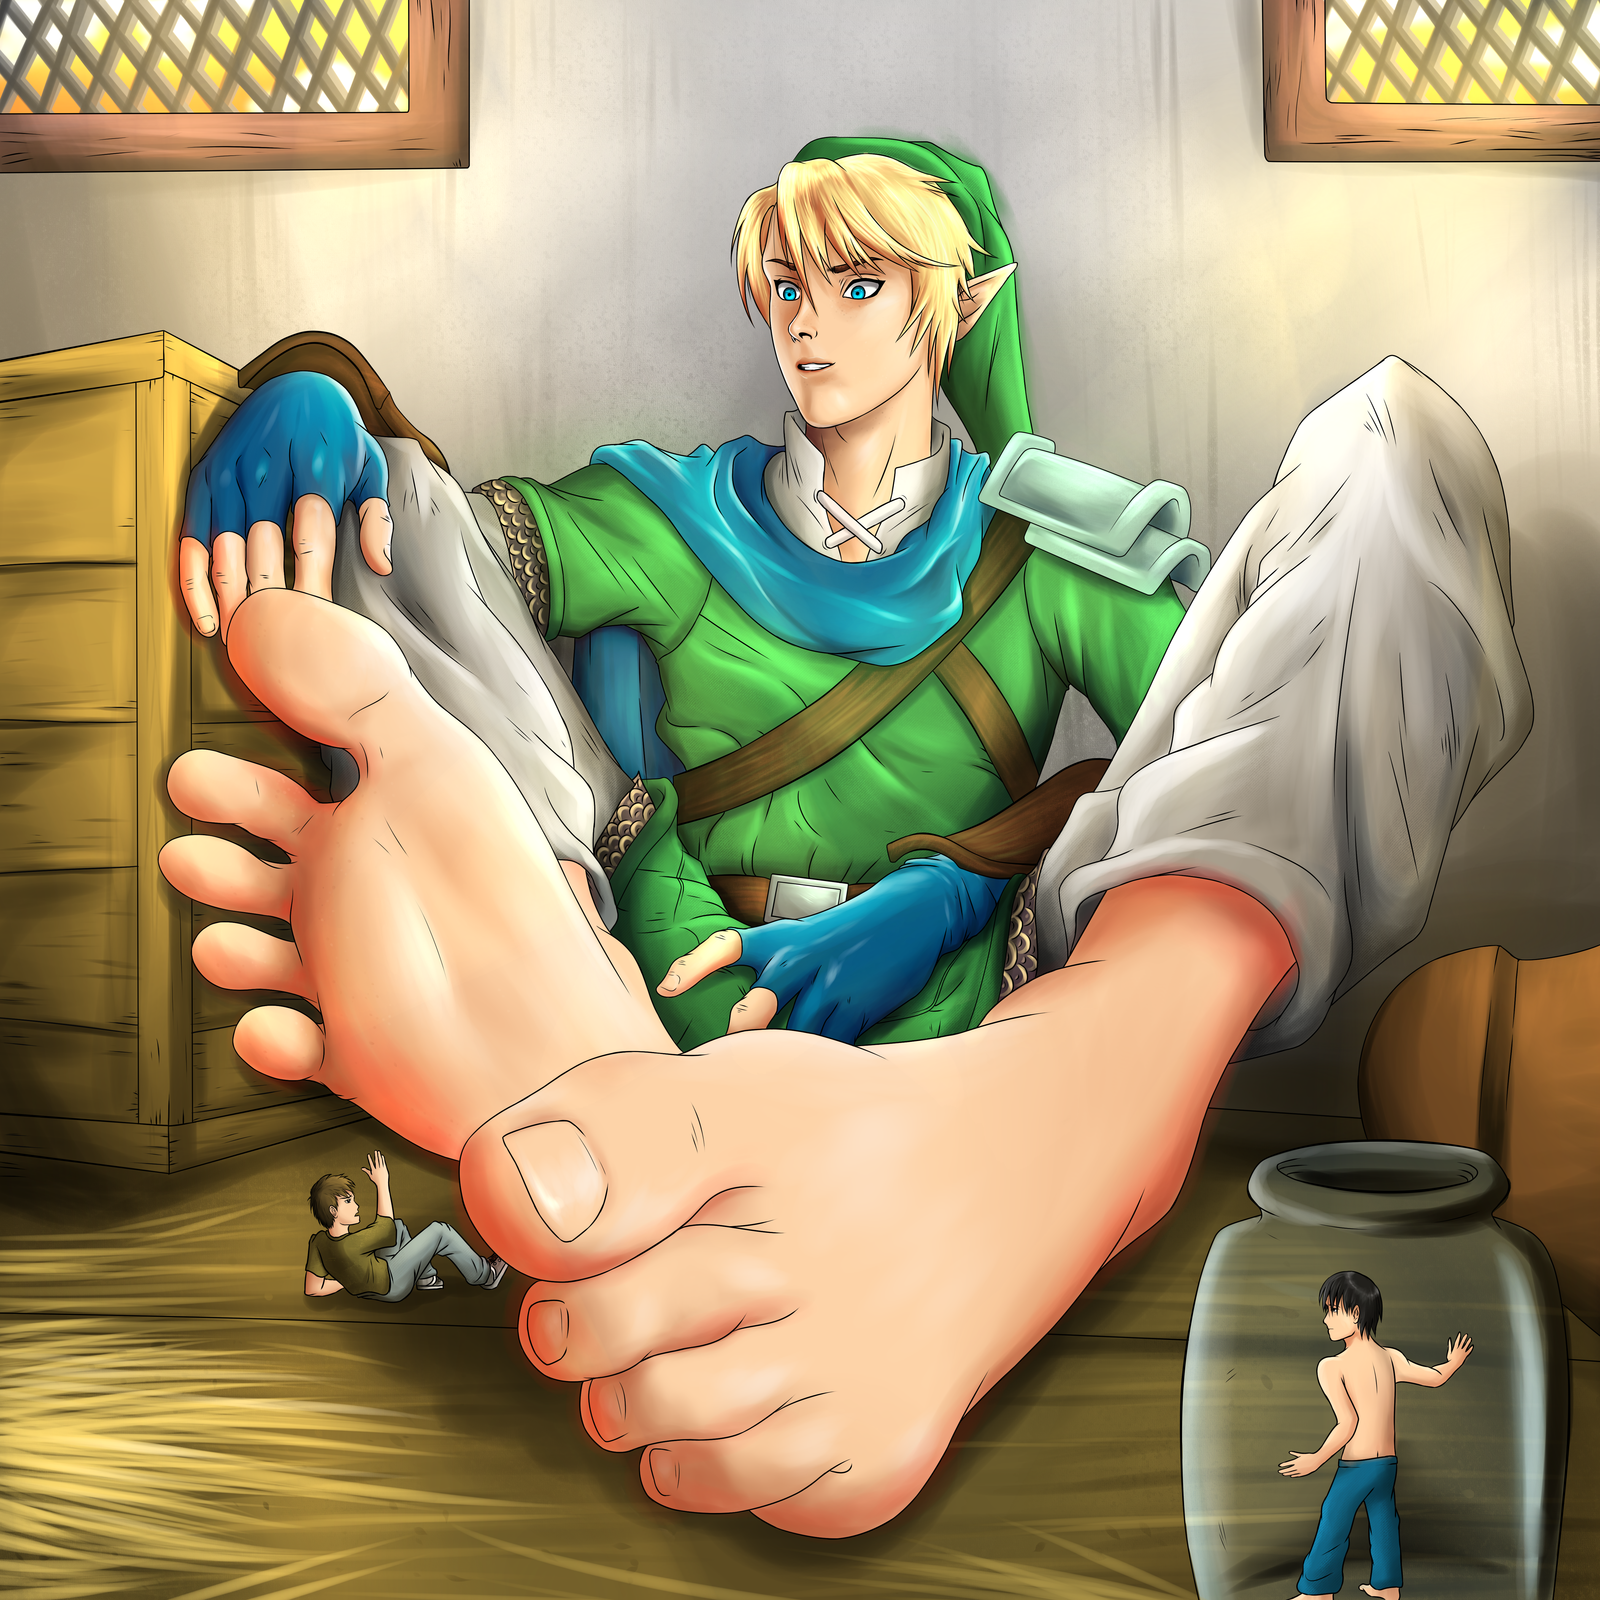 playing_with_link_s_feet_by_trumfire-d8rj3o3.png.